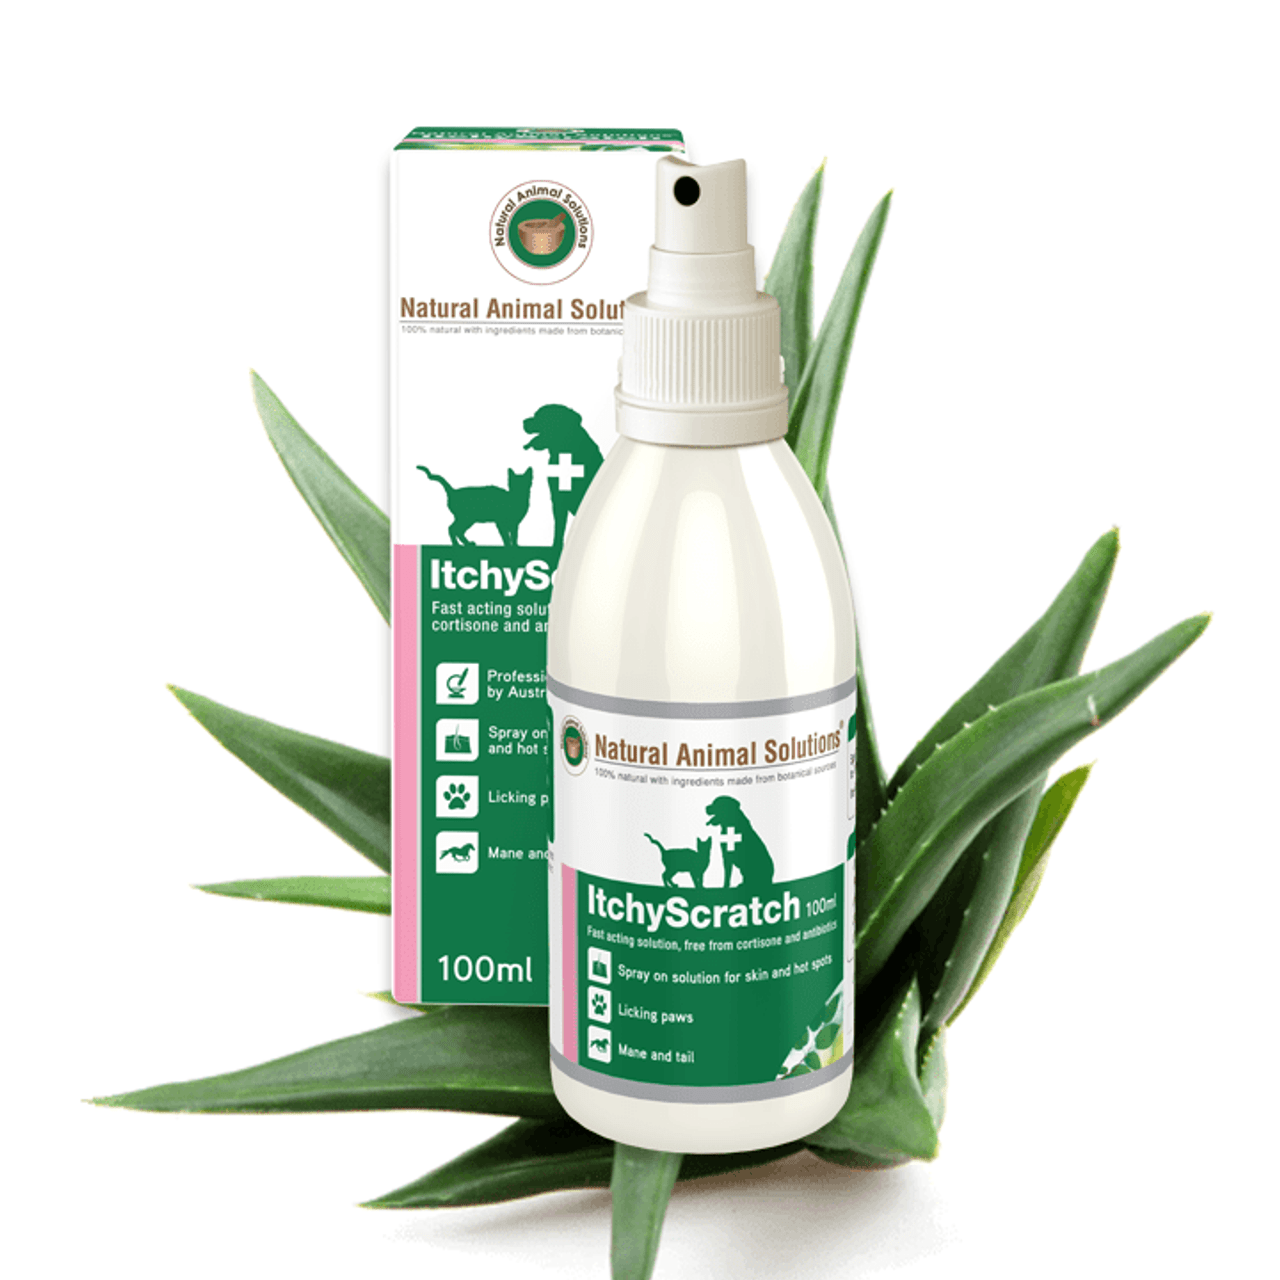 NAS ItchyScratch Skin Spray For Dogs & Cats